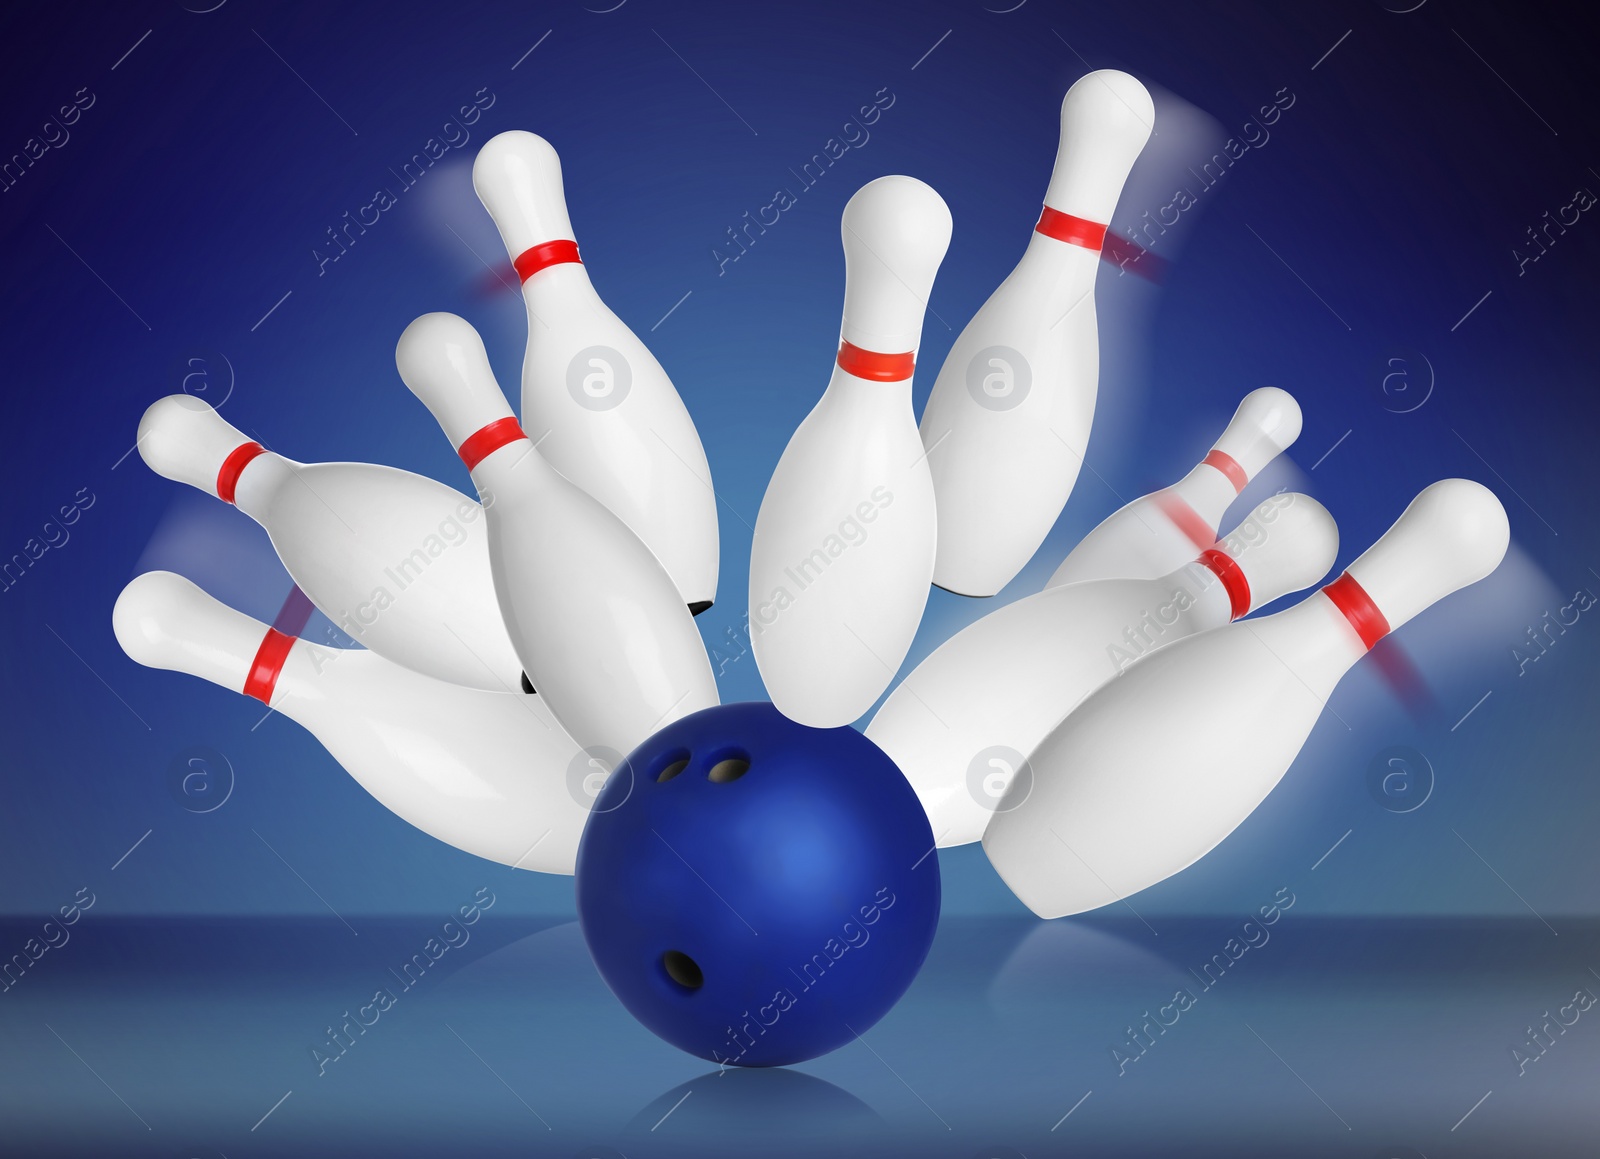 Image of Bowling pins and ball on blue background